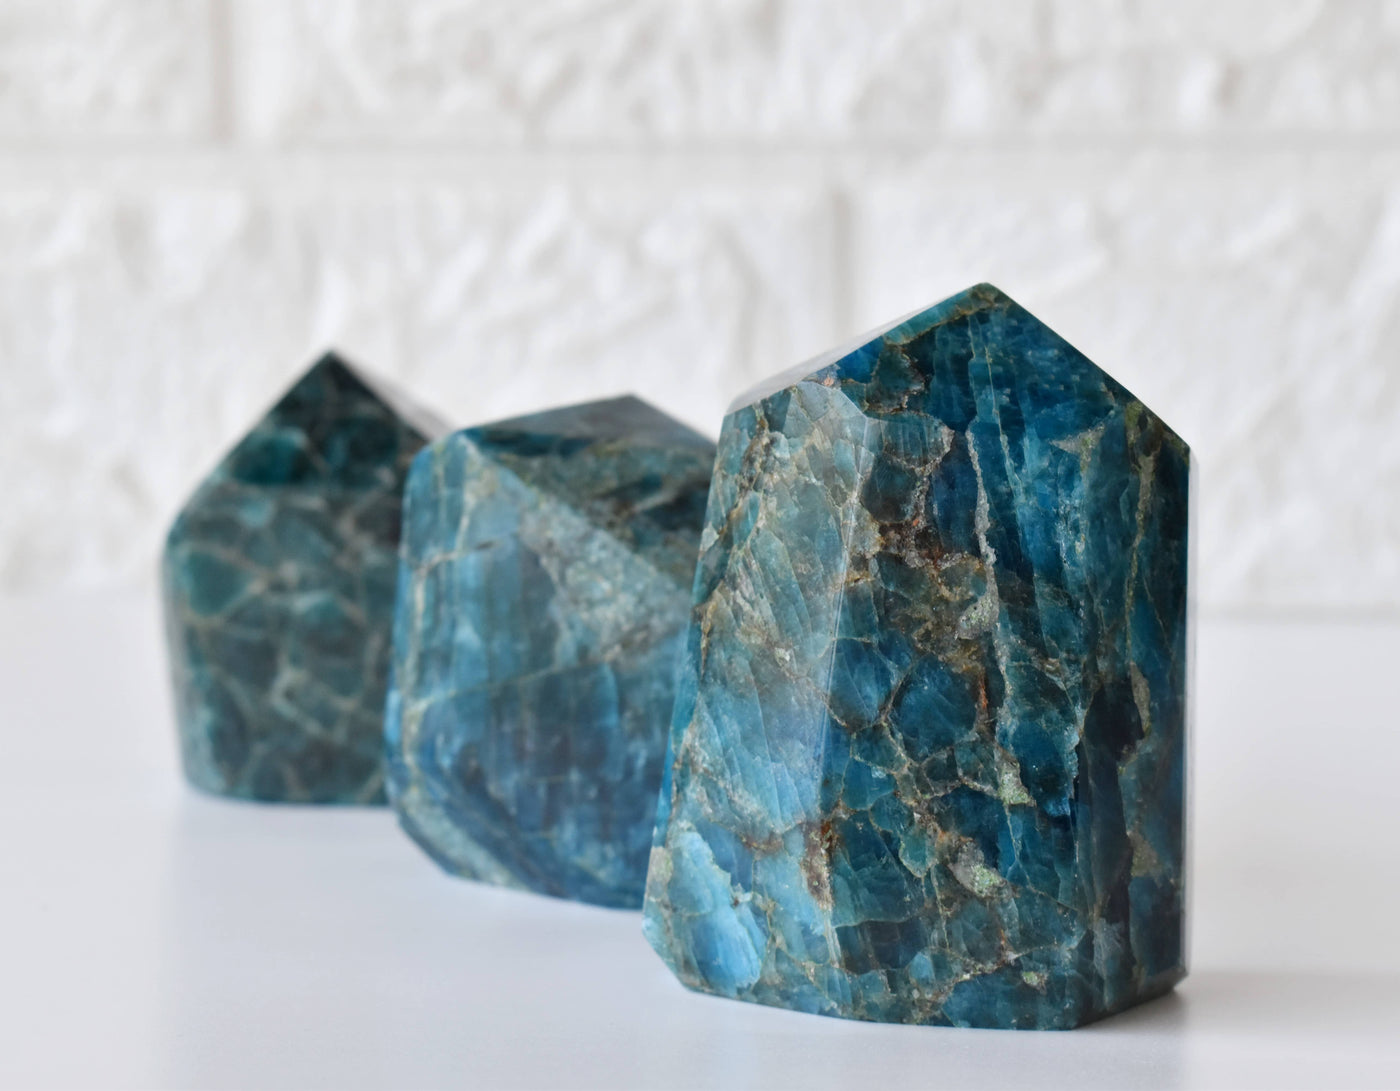 Polished Blue Apatite Points (Inspiration and Psychic Abilities)